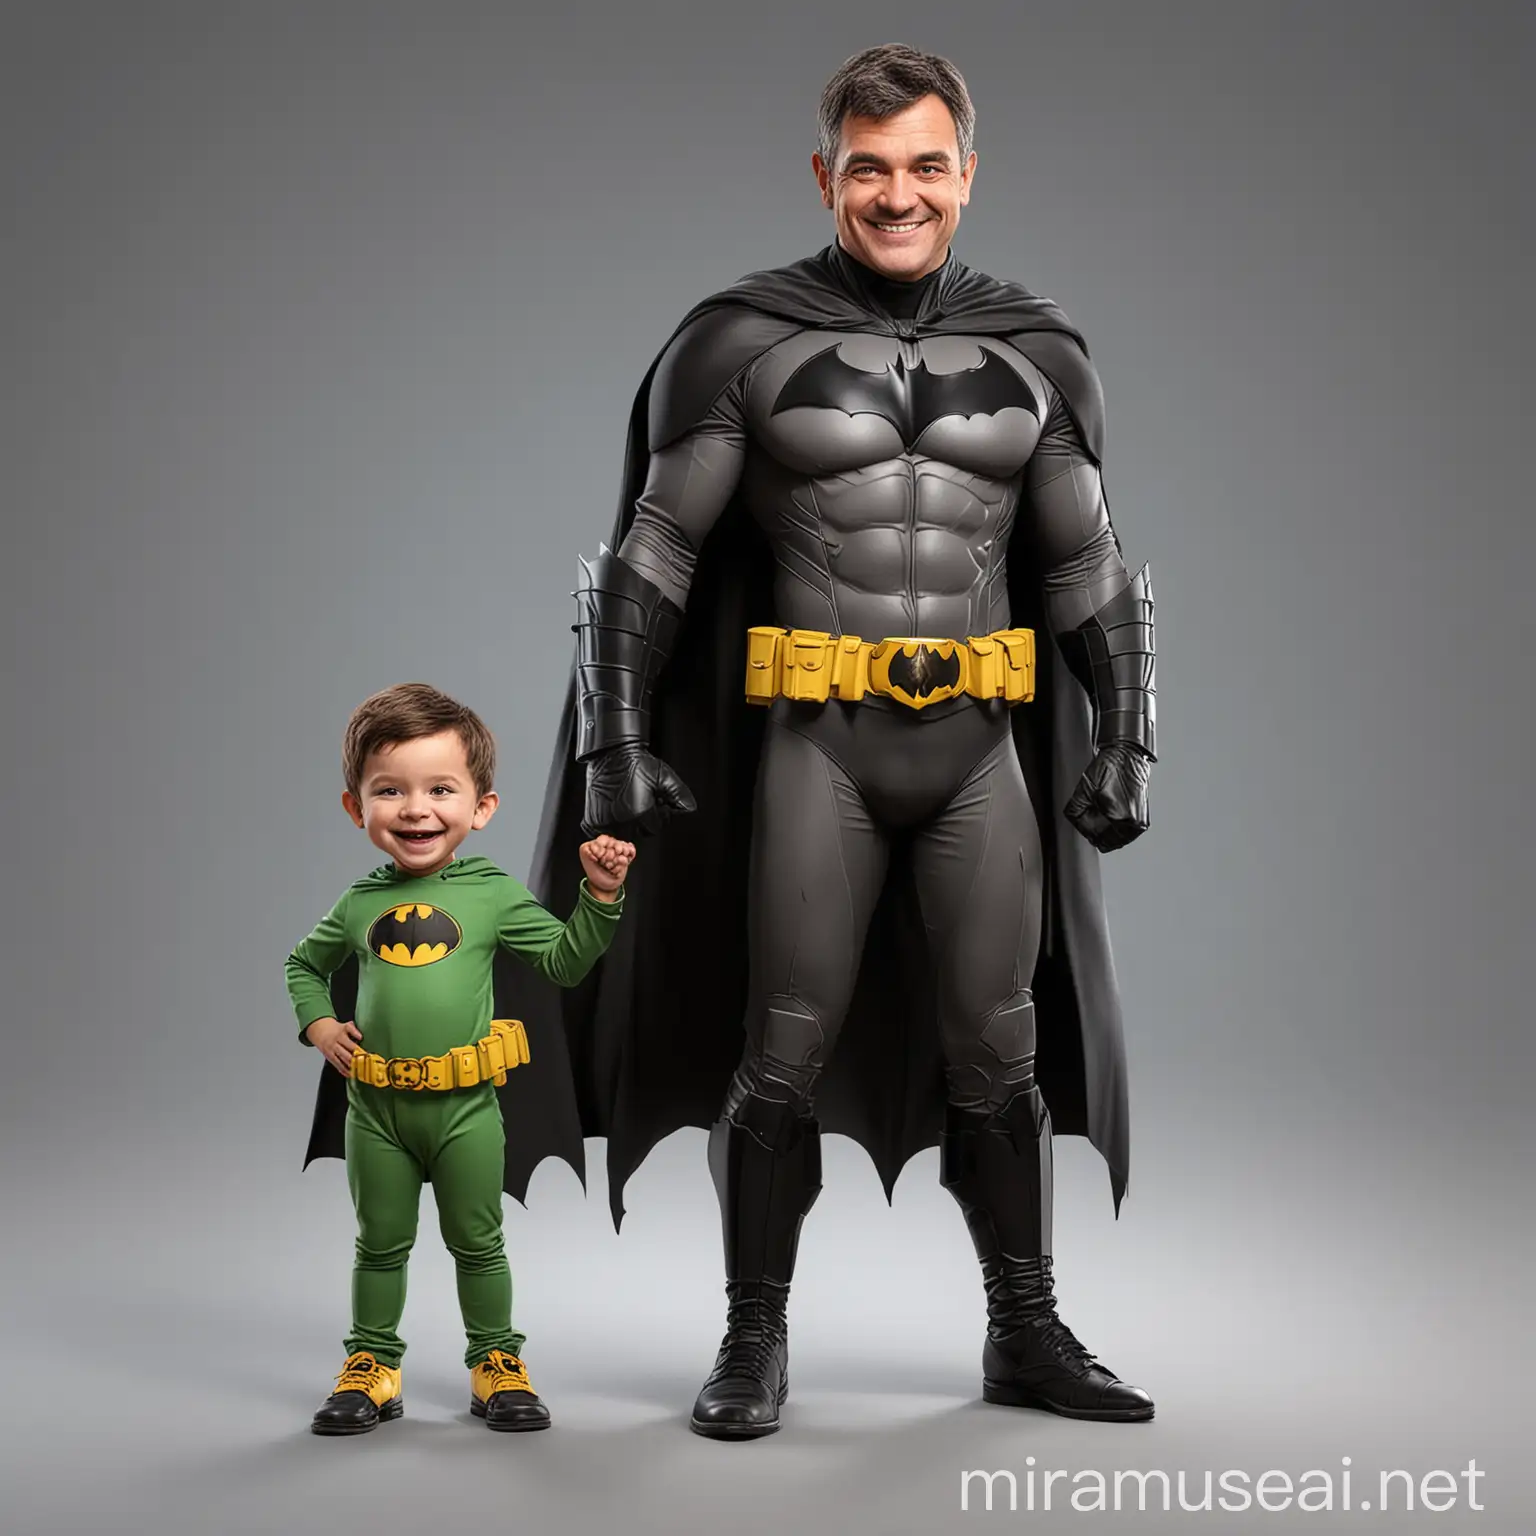 Create realistic 4D caricature full body, An adult man with short hair, wearing a Batman costume, and a 5 year old child wearing a kid robin costume, Front view smiling photo, and bright solid background